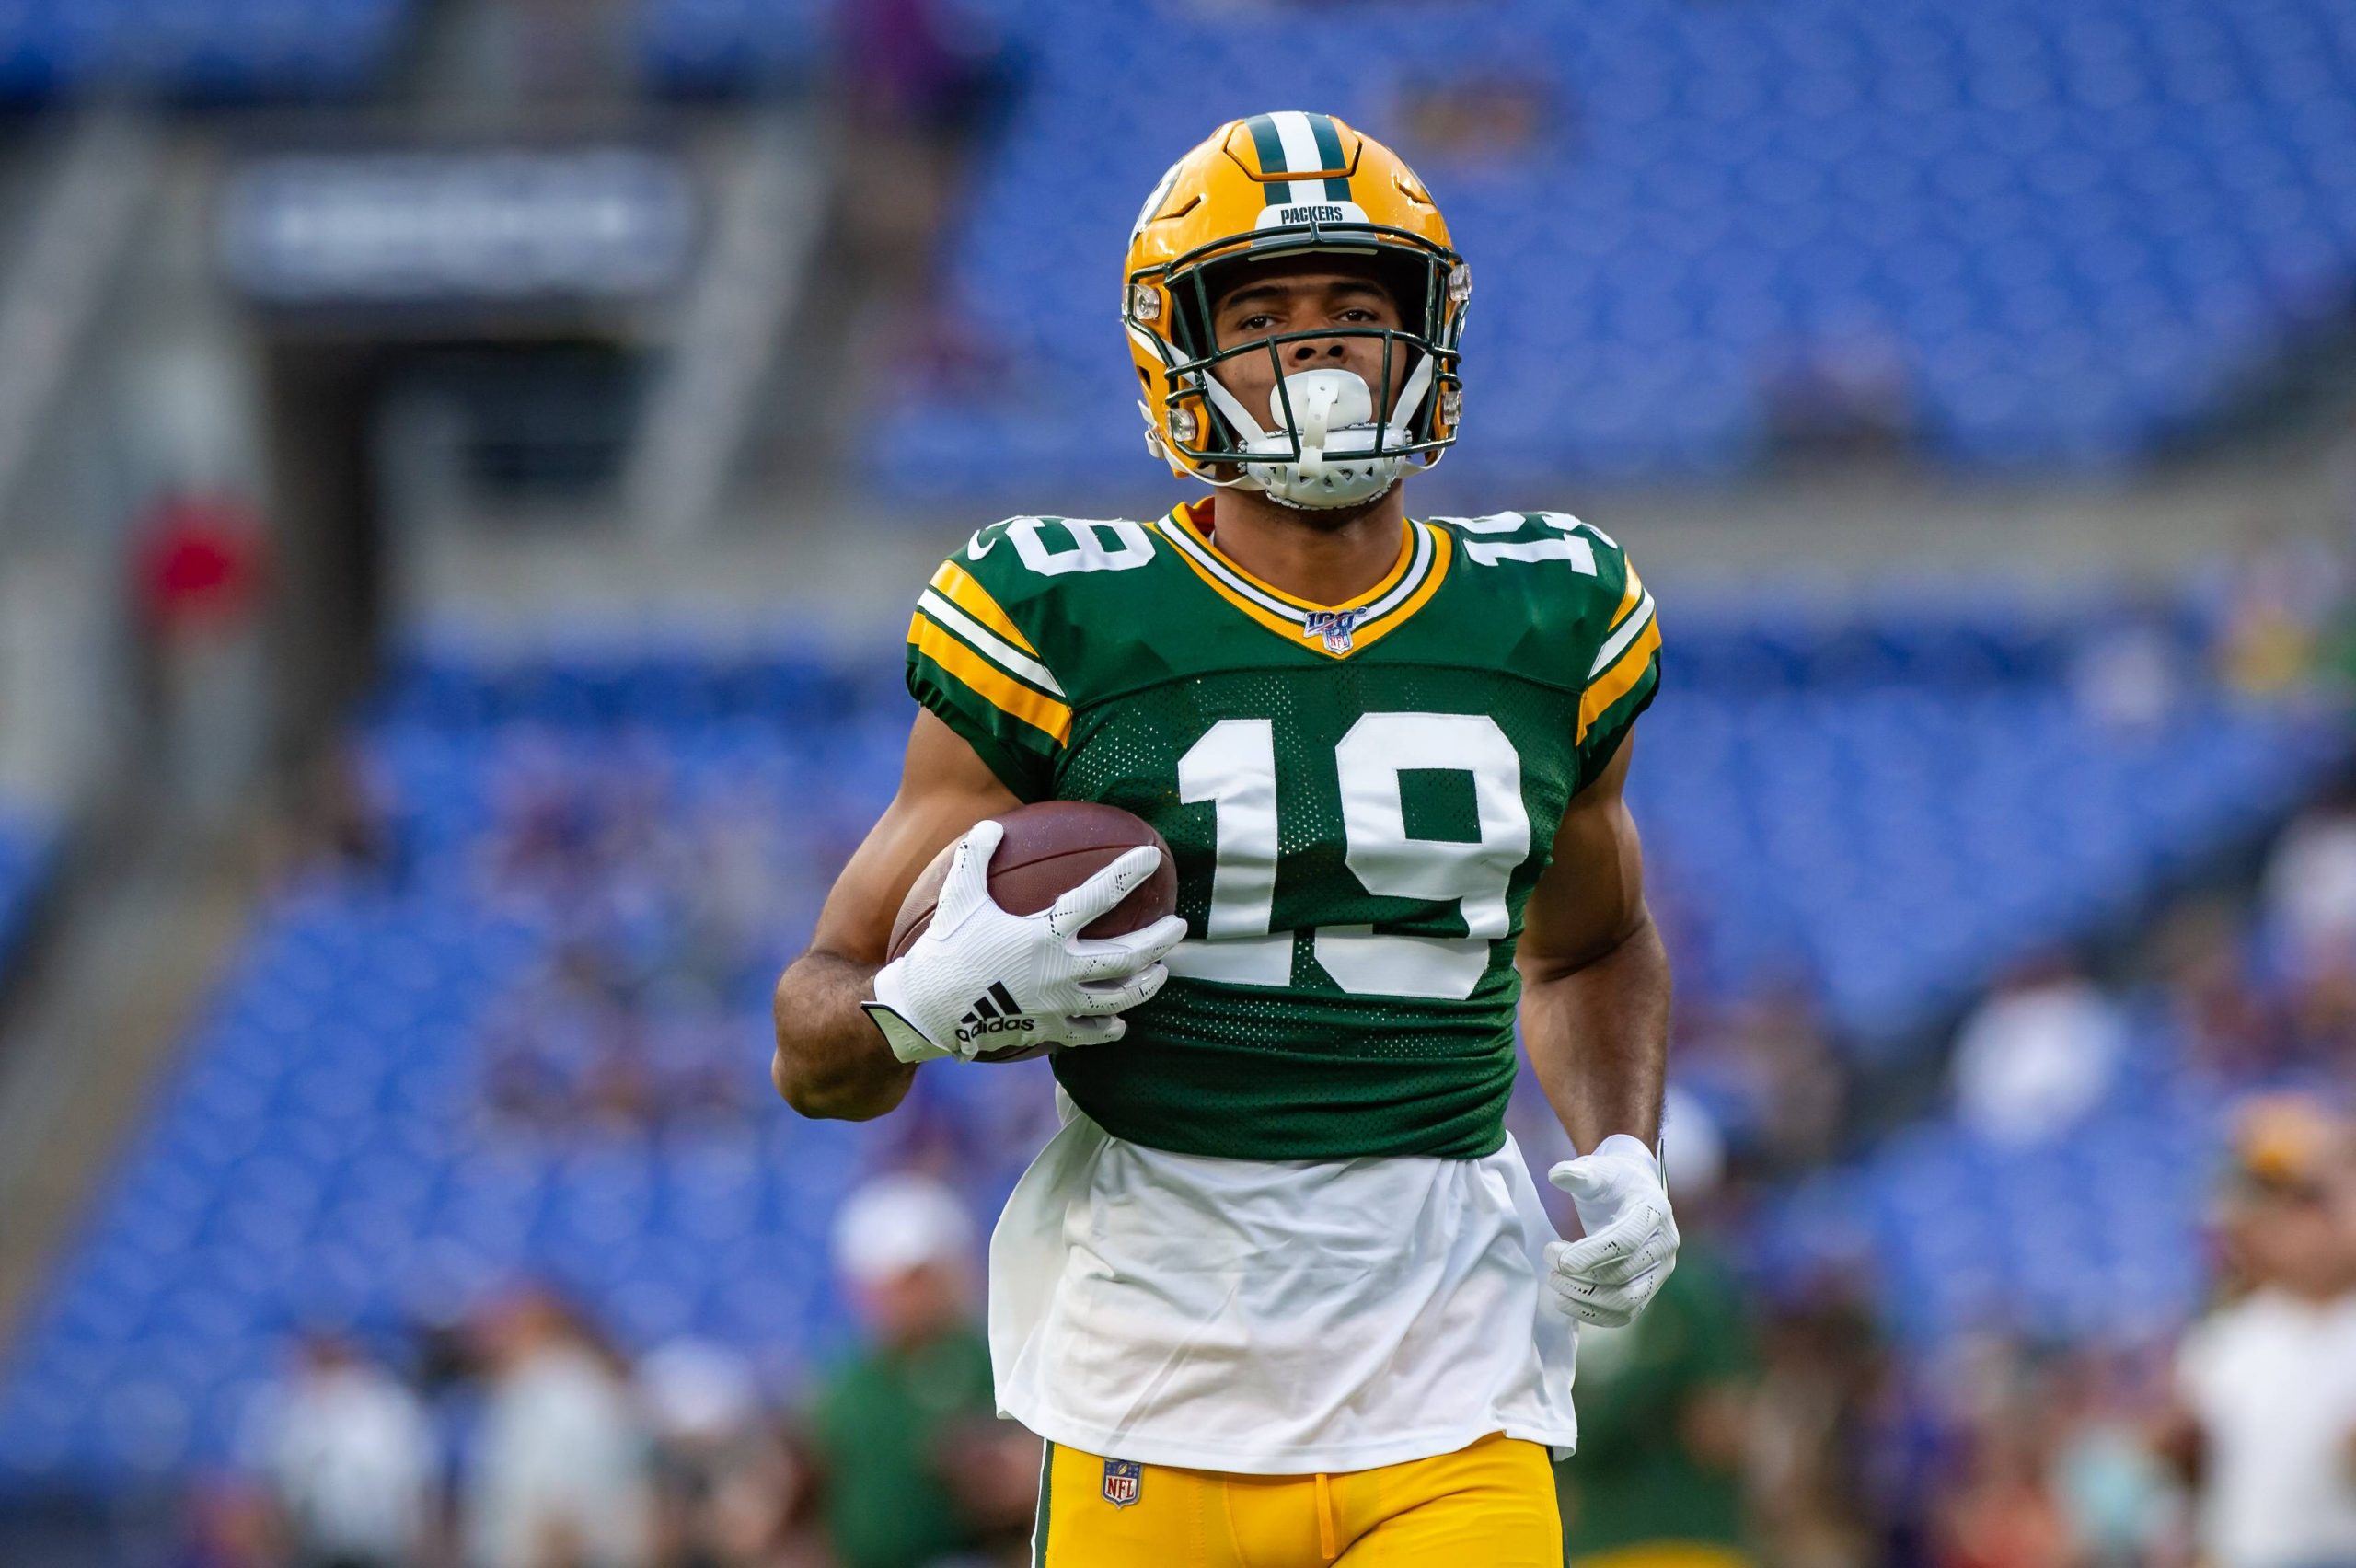 BALTIMORE, MD - AUGUST 15: Green Bay Packers wide receiver Equanimeous St. Brown (19) warms up during the National Football League preseason game between the Green Bay Packers and Baltimore Ravens on August 15, 2019 at M&T Bank Stadium in Baltimore, MD (Photo by John Jones/Icon Sportswire) NFL, American Football Herren, USA AUG 15 Preseason - Packers at Ravens PUBLICATIONxINxGERxSUIxAUTxHUNxRUSxSWExNORxDENxONLY Icon19081545